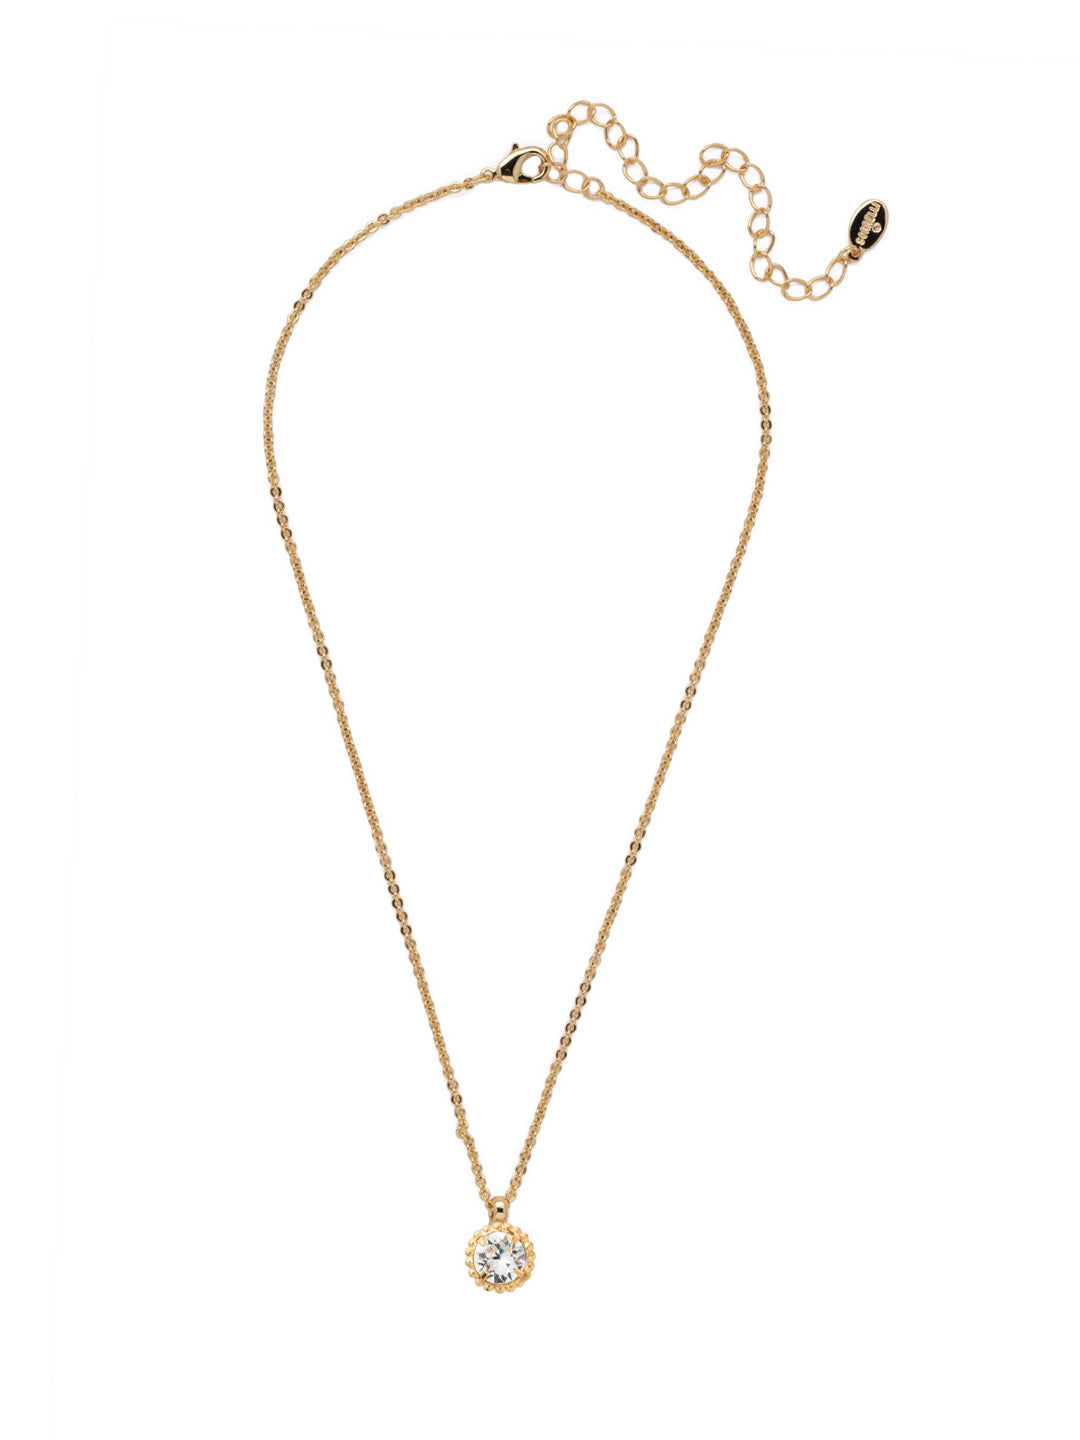 Simplicity Pendant Necklace - NBY38BGCRY - <p>Perfect for any day! The Simplicity Pendant Necklace features a round cut crystal with vintage edging. From Sorrelli's Crystal collection in our Bright Gold-tone finish.</p>